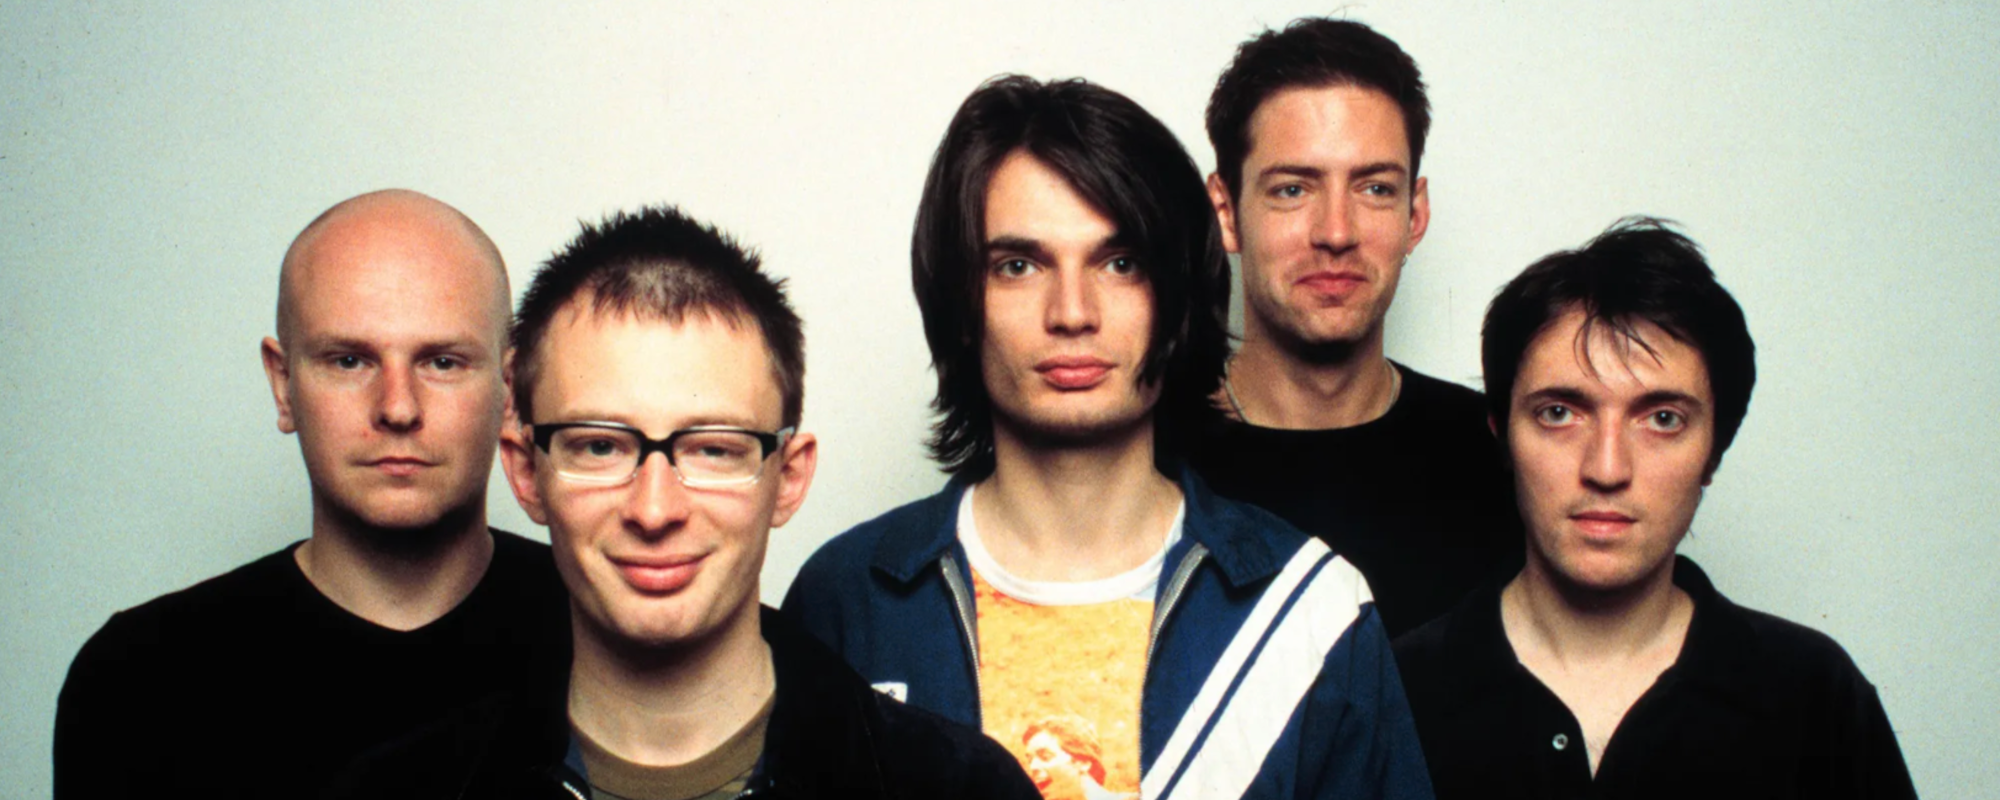 The Deeper Meaning Behind Radiohead’s Game-Changing Alternative Rock Song “Paranoid Android”